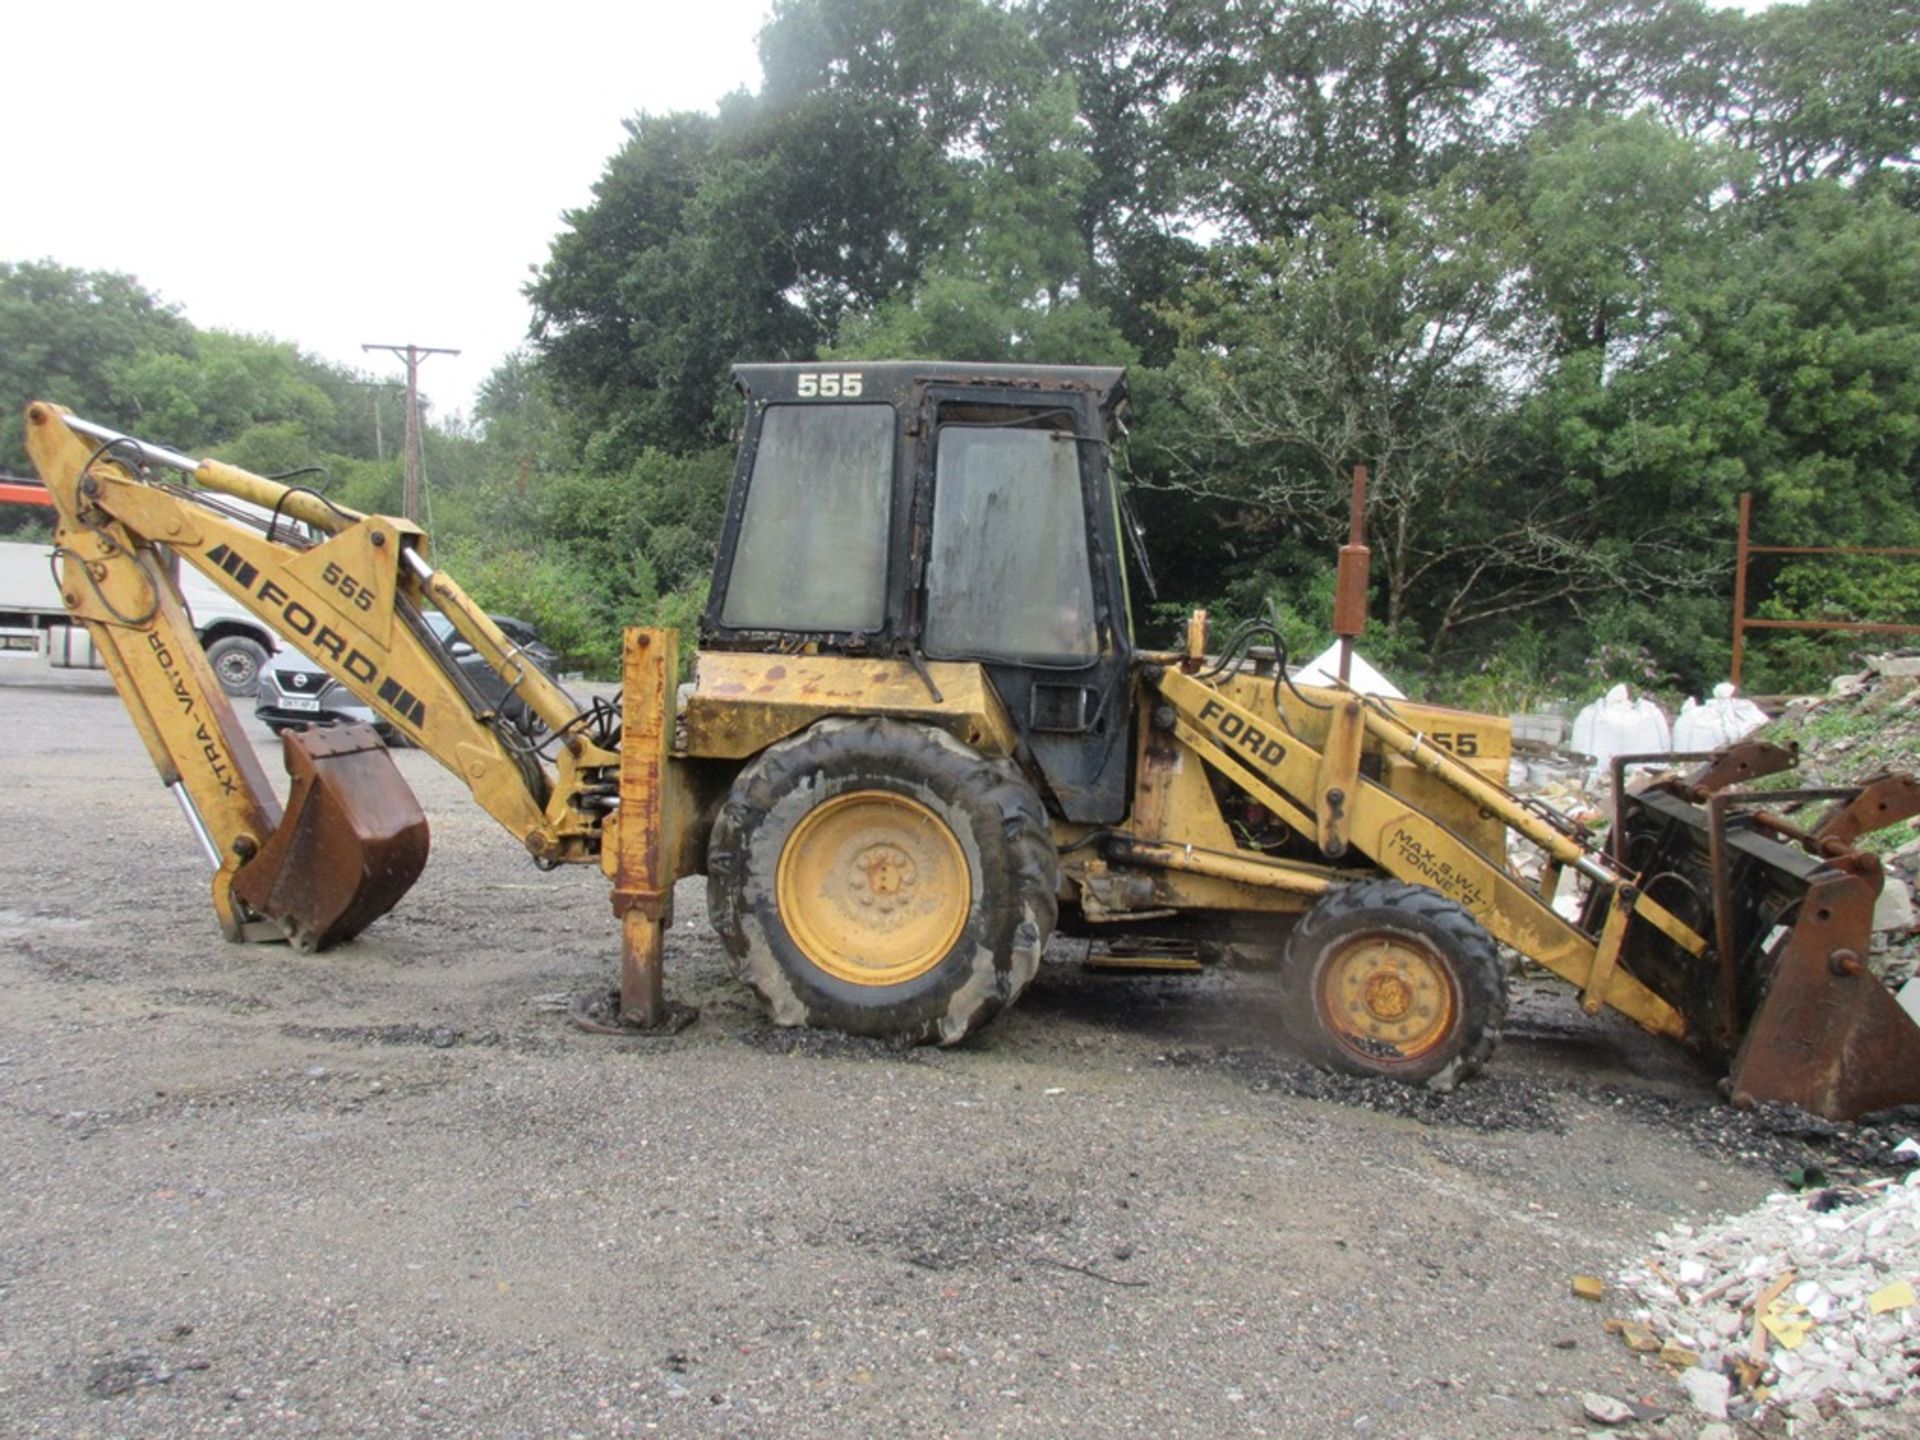 Ford 555 Xtra-Vator back hoe front loader (1998) with 4 double bucket, max SWL 1 Tonne Mileage: 13,